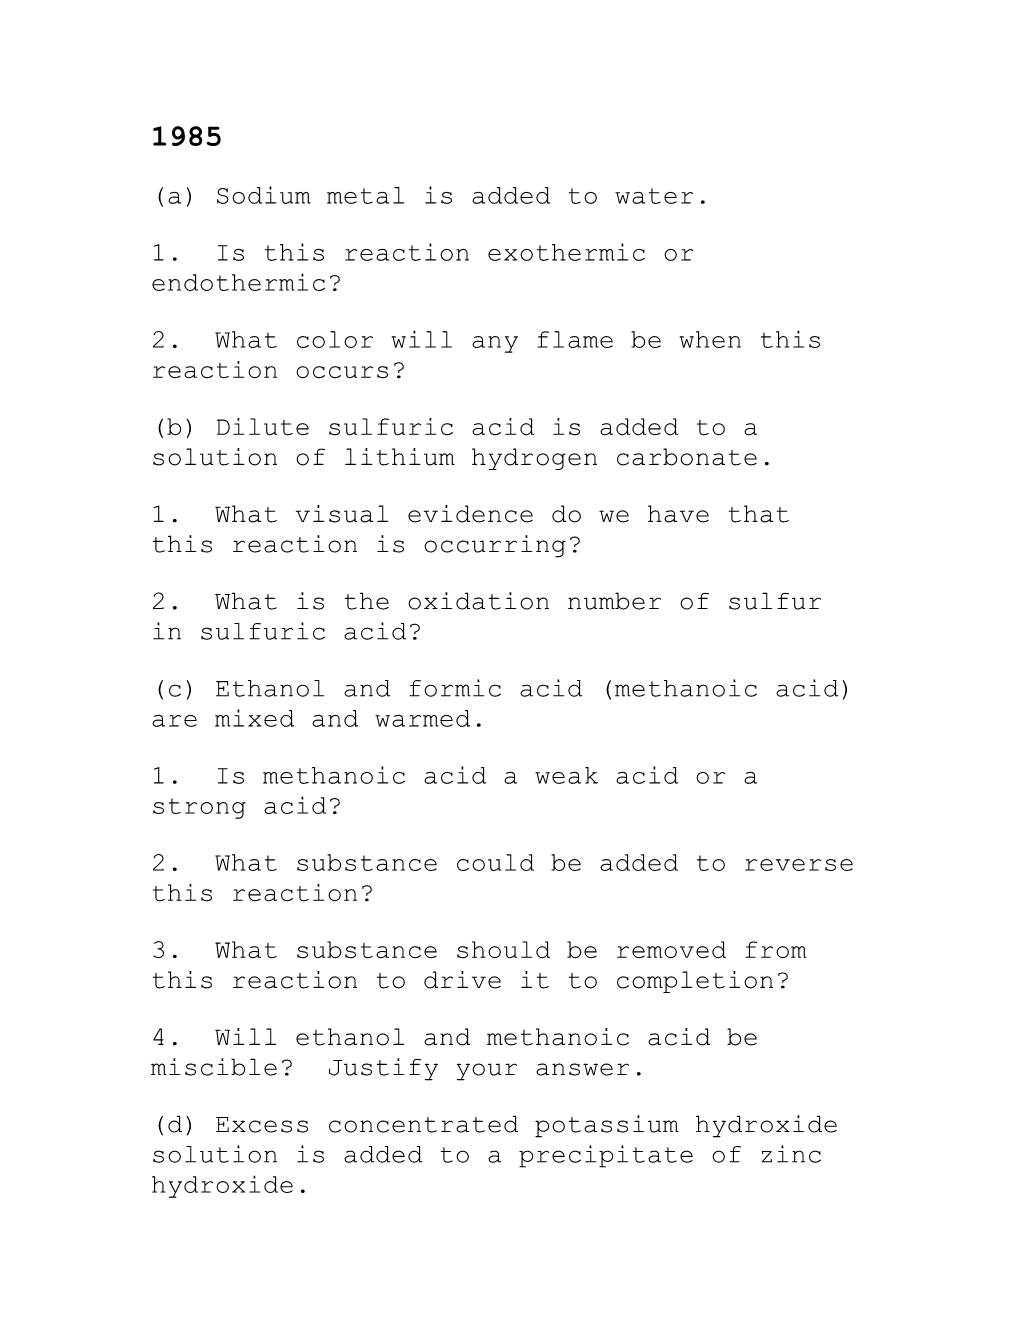 (A) Sodium Metal Is Added to Water